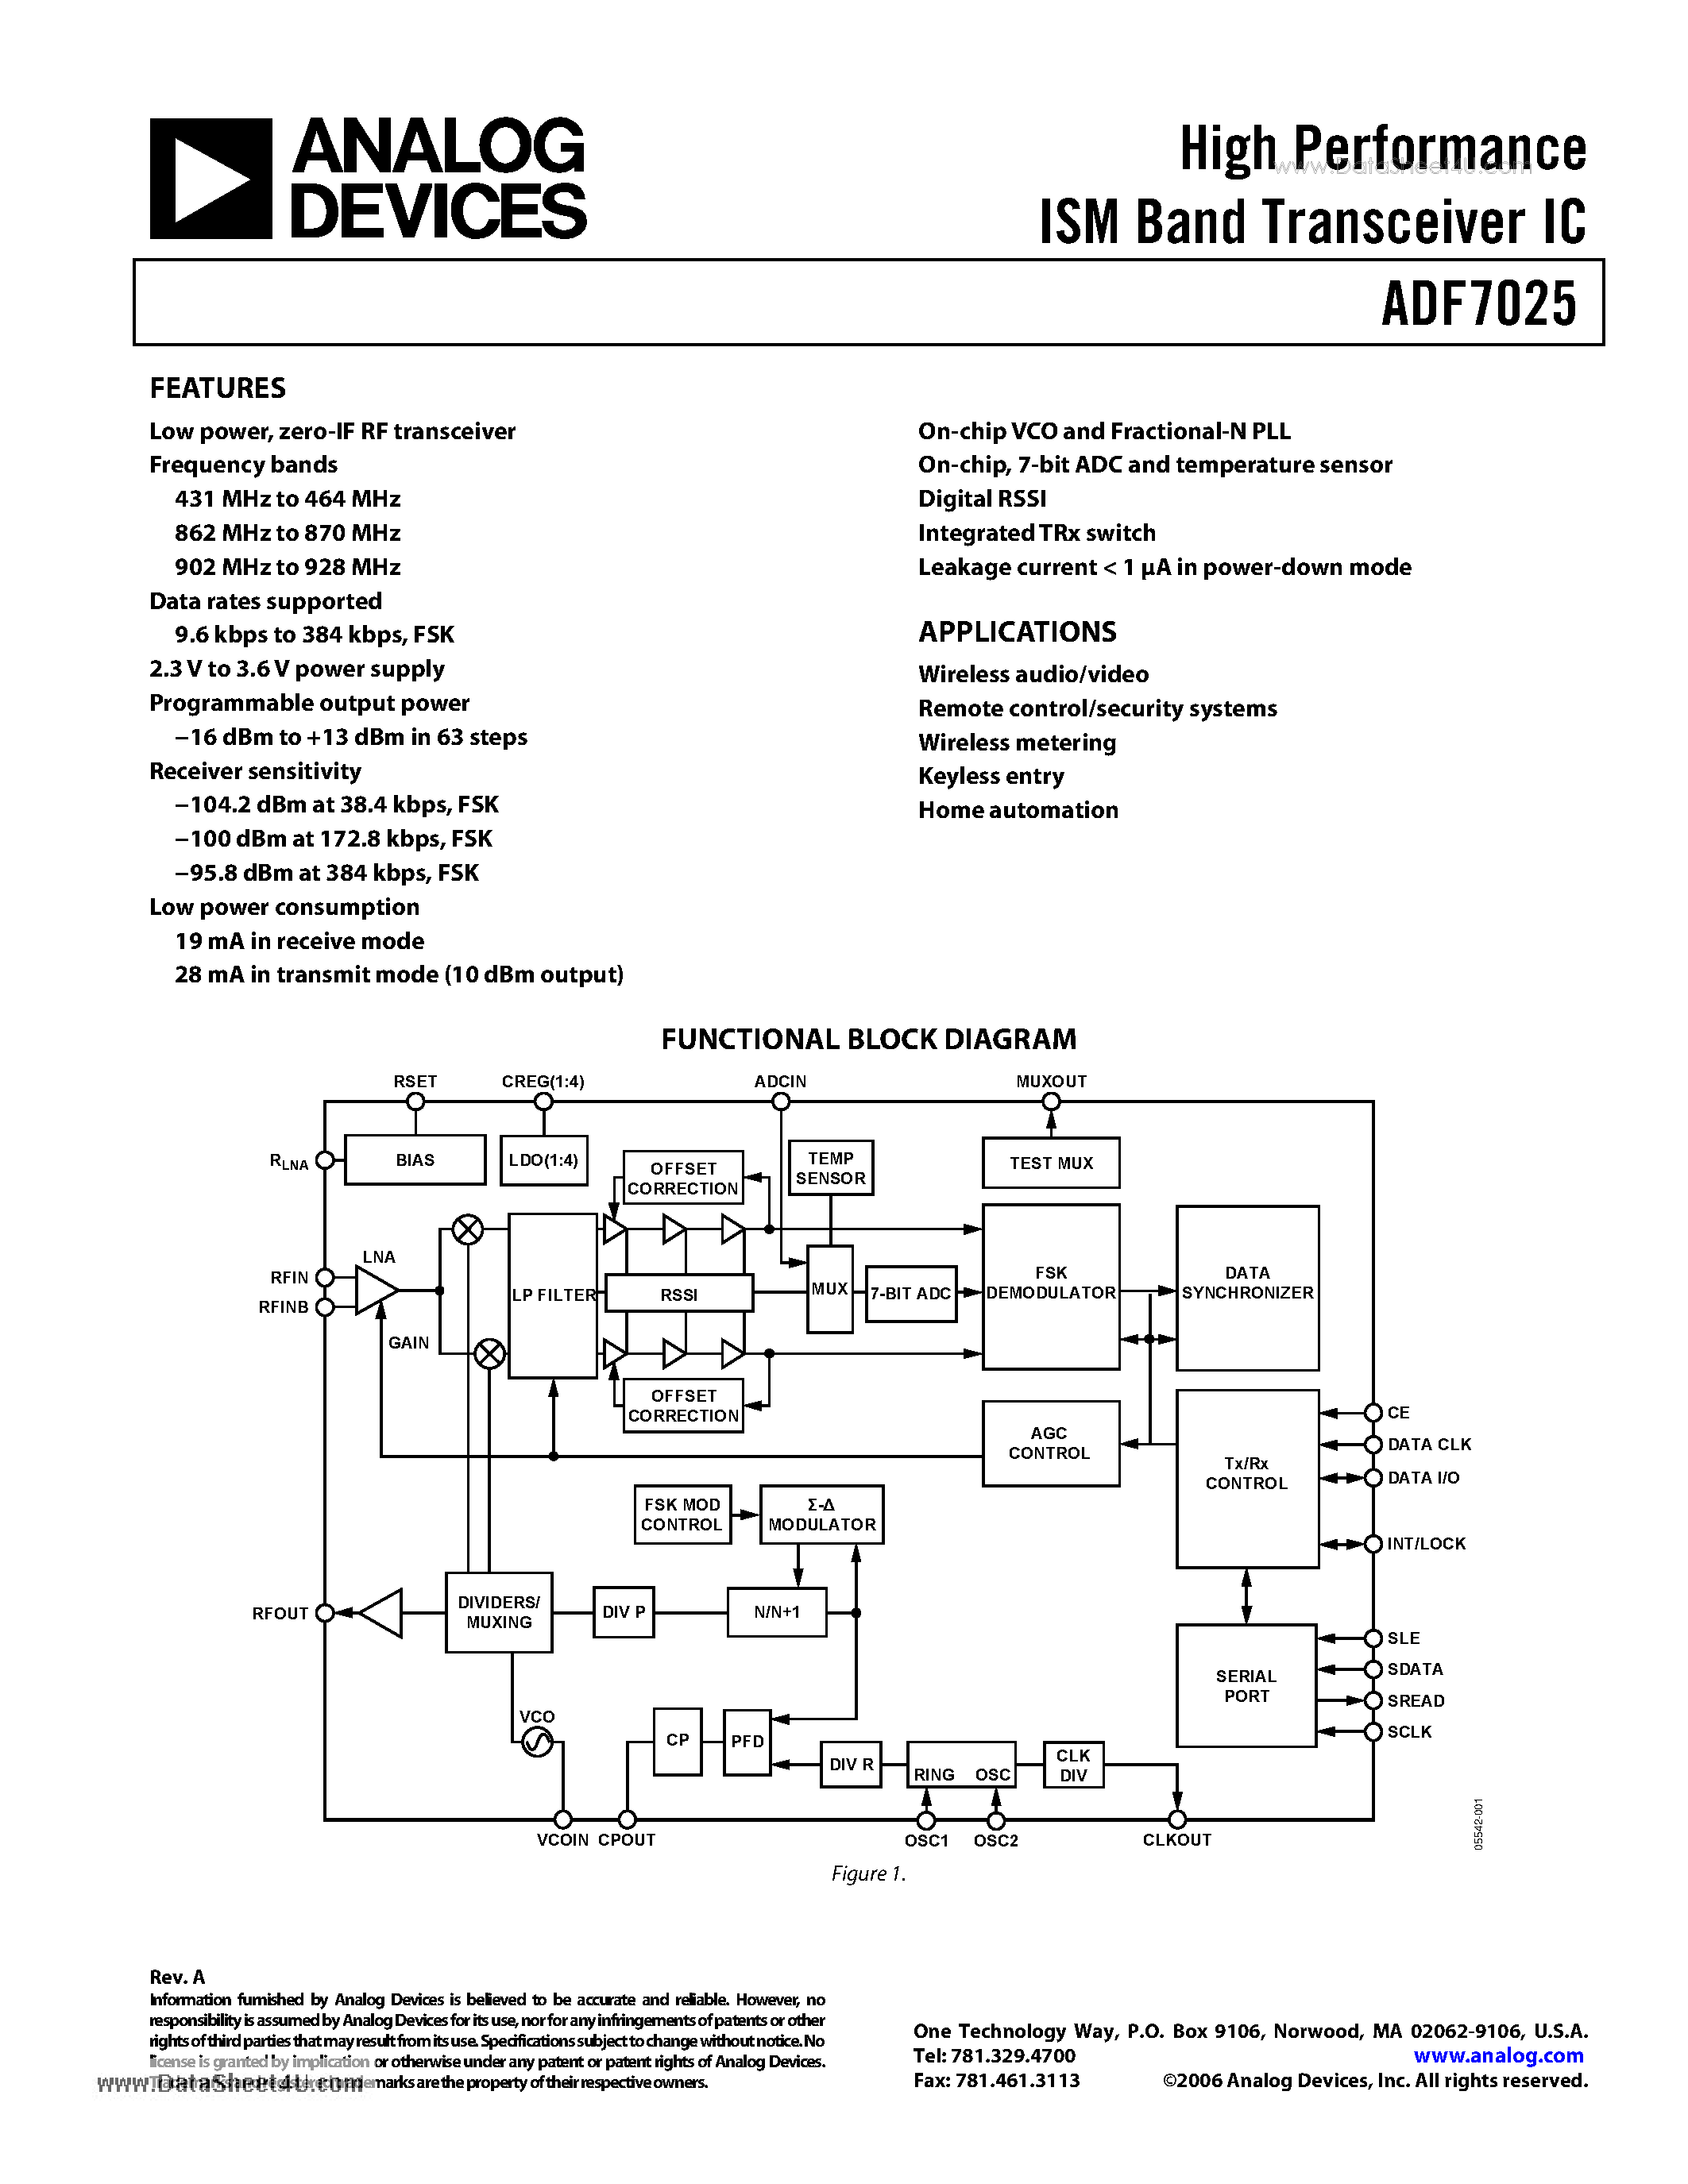 Datasheet ADF7025 - High Performance ISM Band Transceiver IC page 1